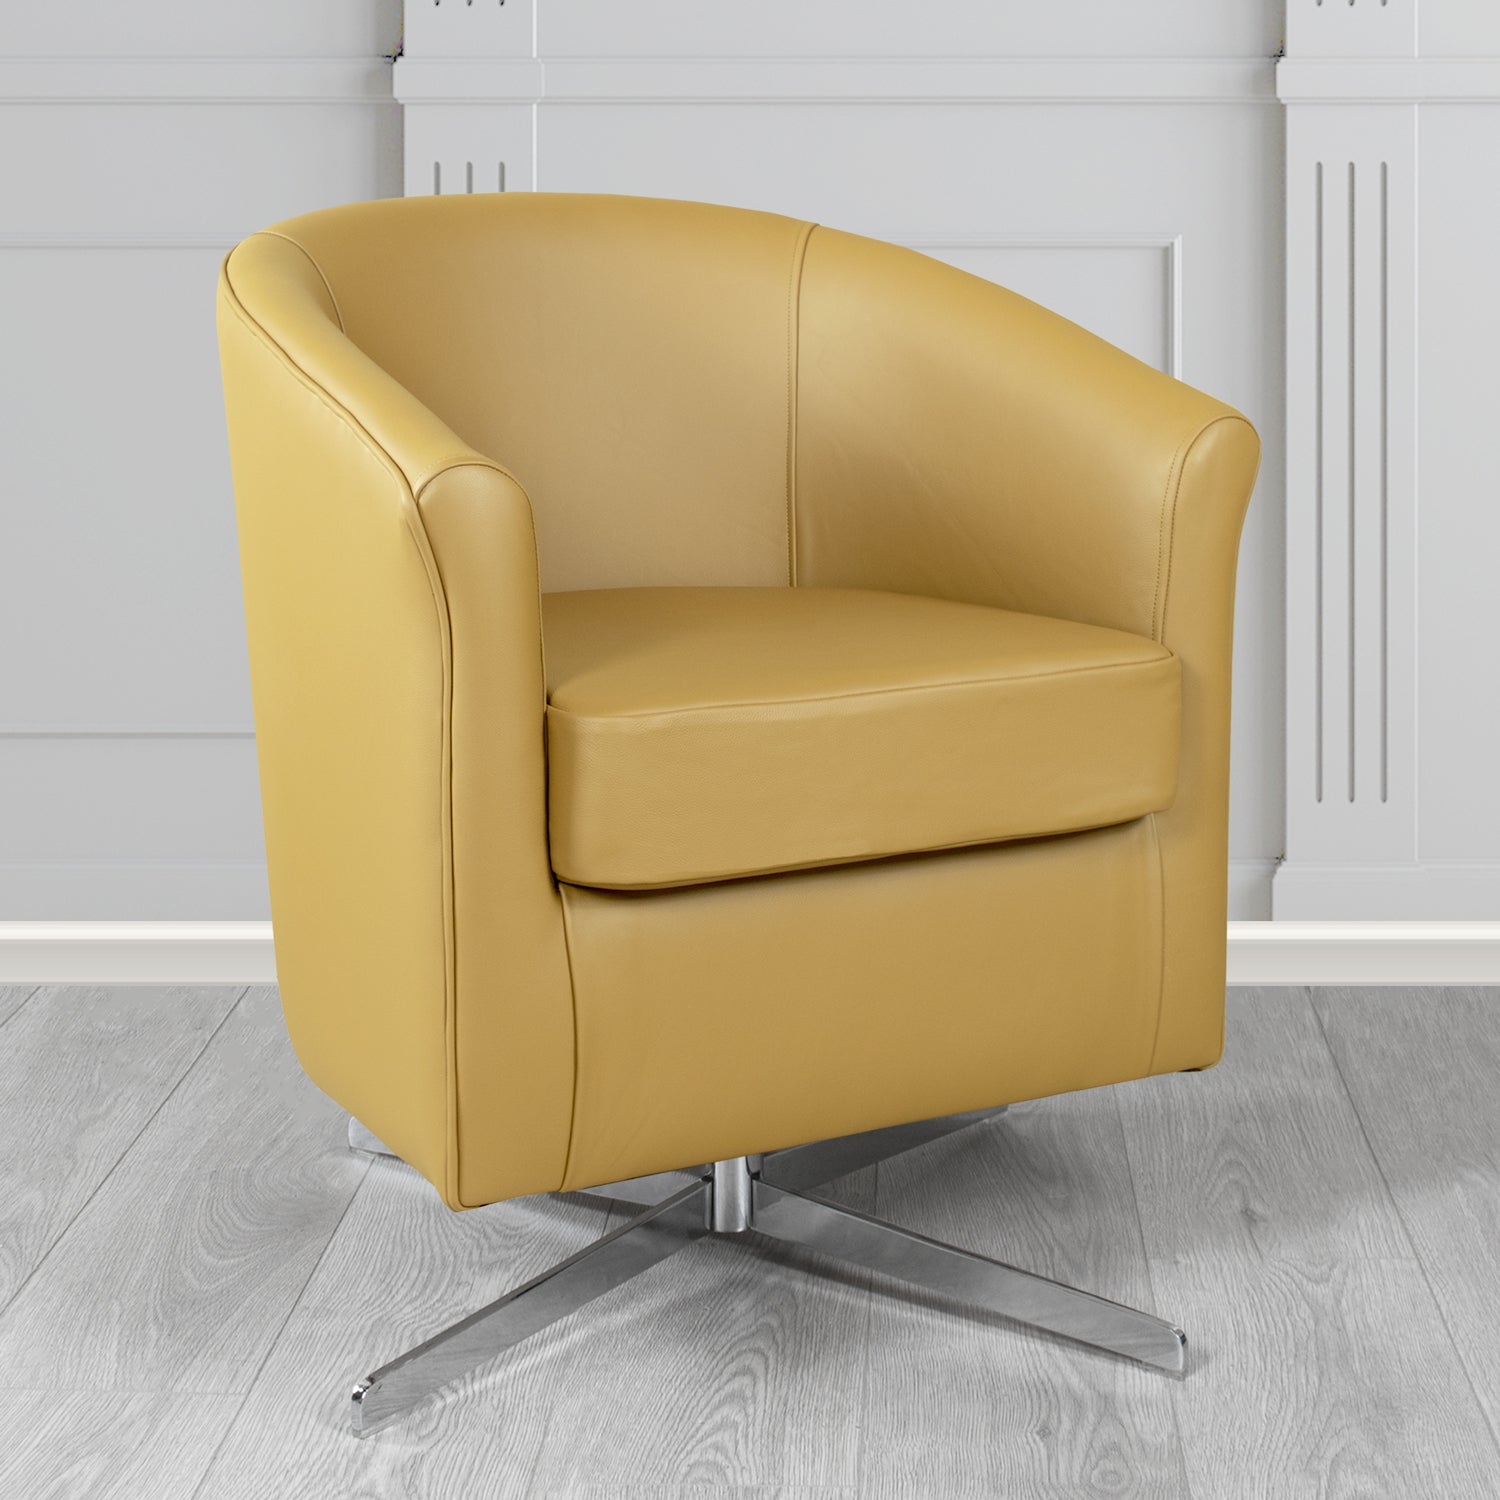 Cannes Swivel Tub Chair in Shelly Parchment Crib 5 Genuine Leather - The Tub Chair Shop